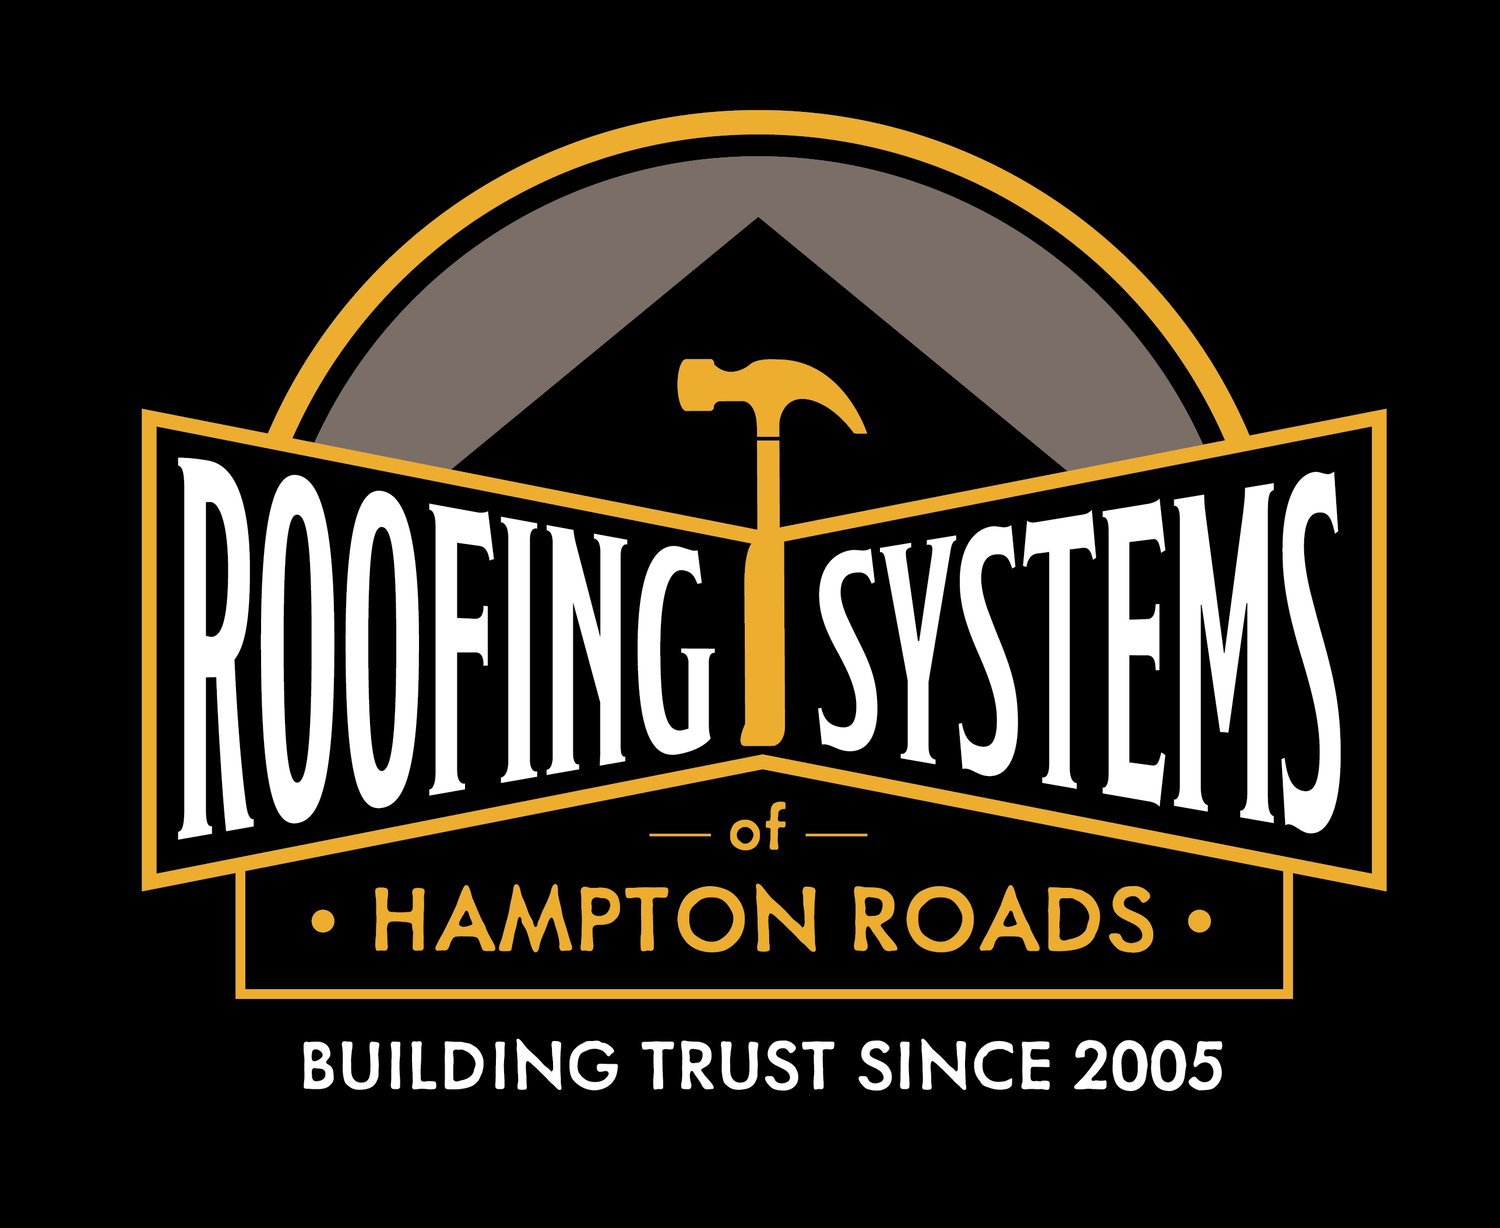 Roofing Systems of Hampton Roads